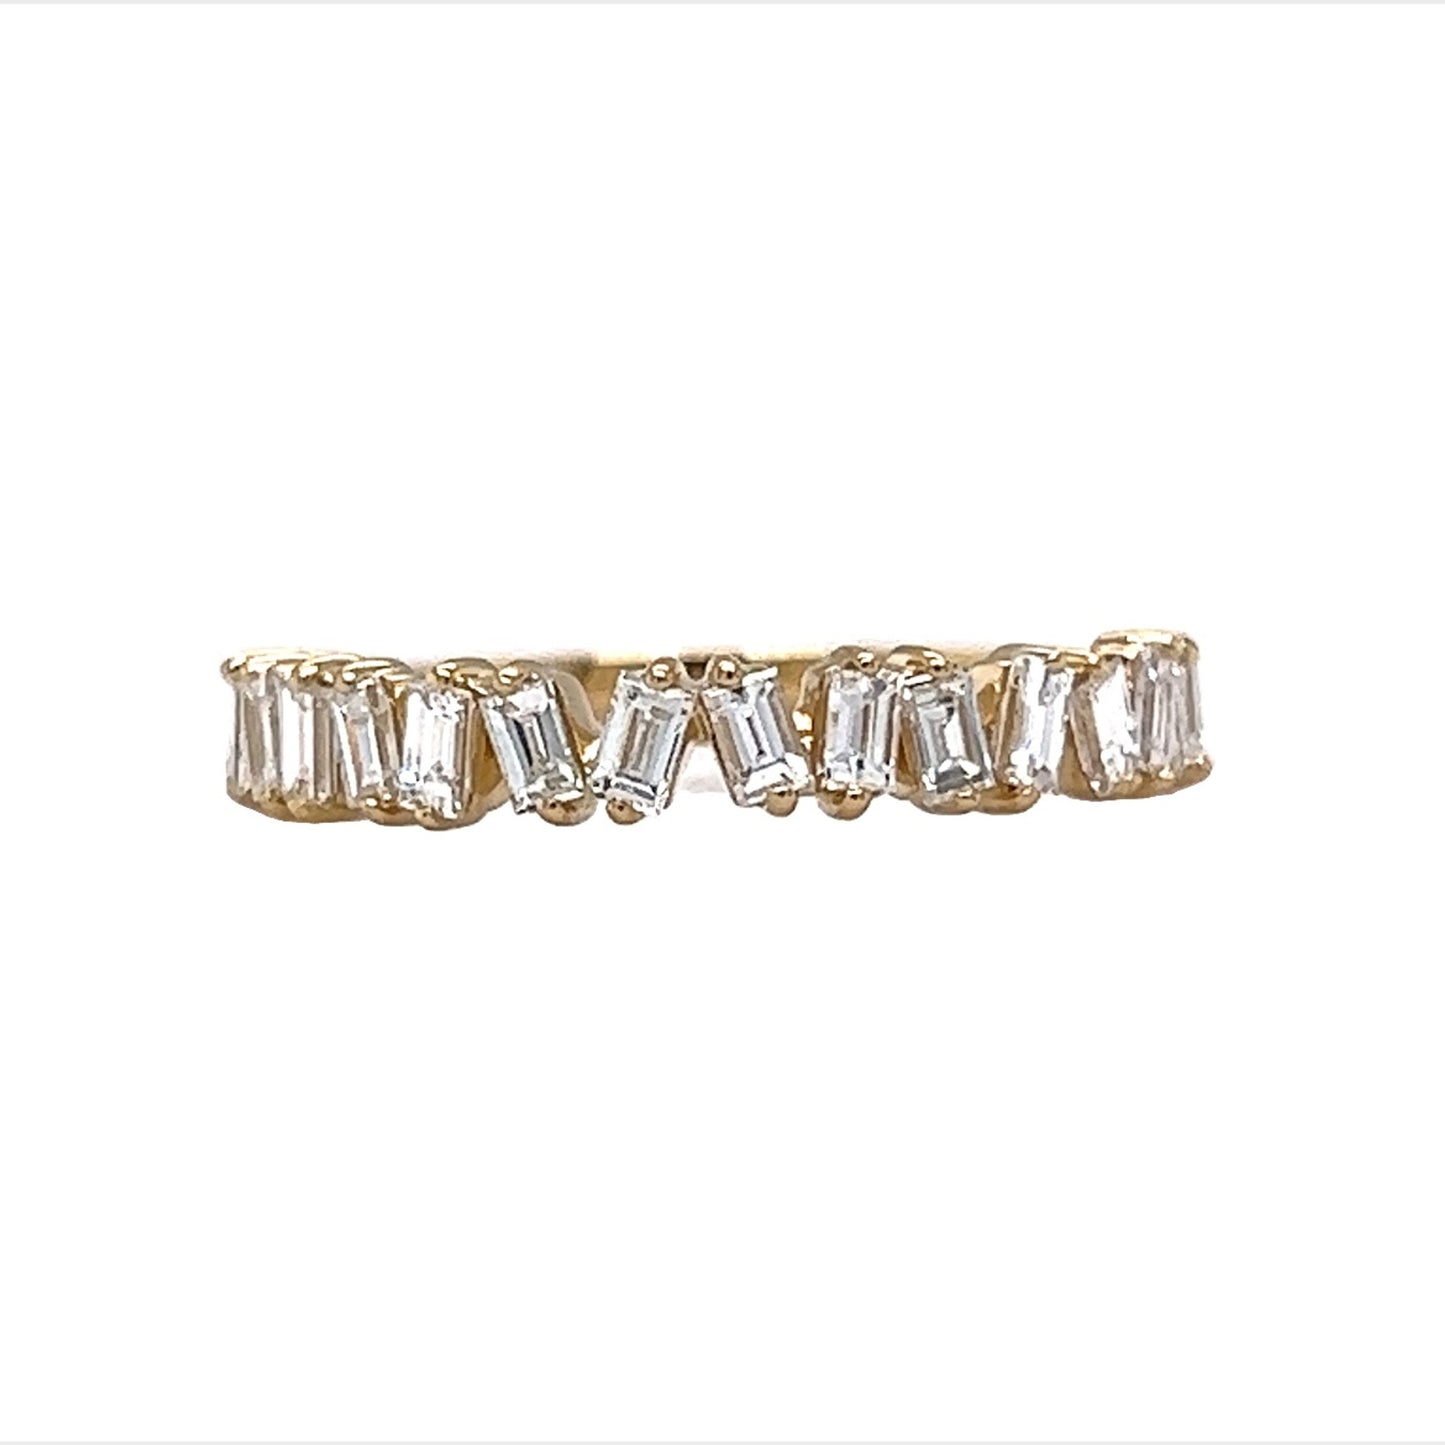 Staggered Baguette Cut Diamond Wedding Band in 14k Yellow Gold